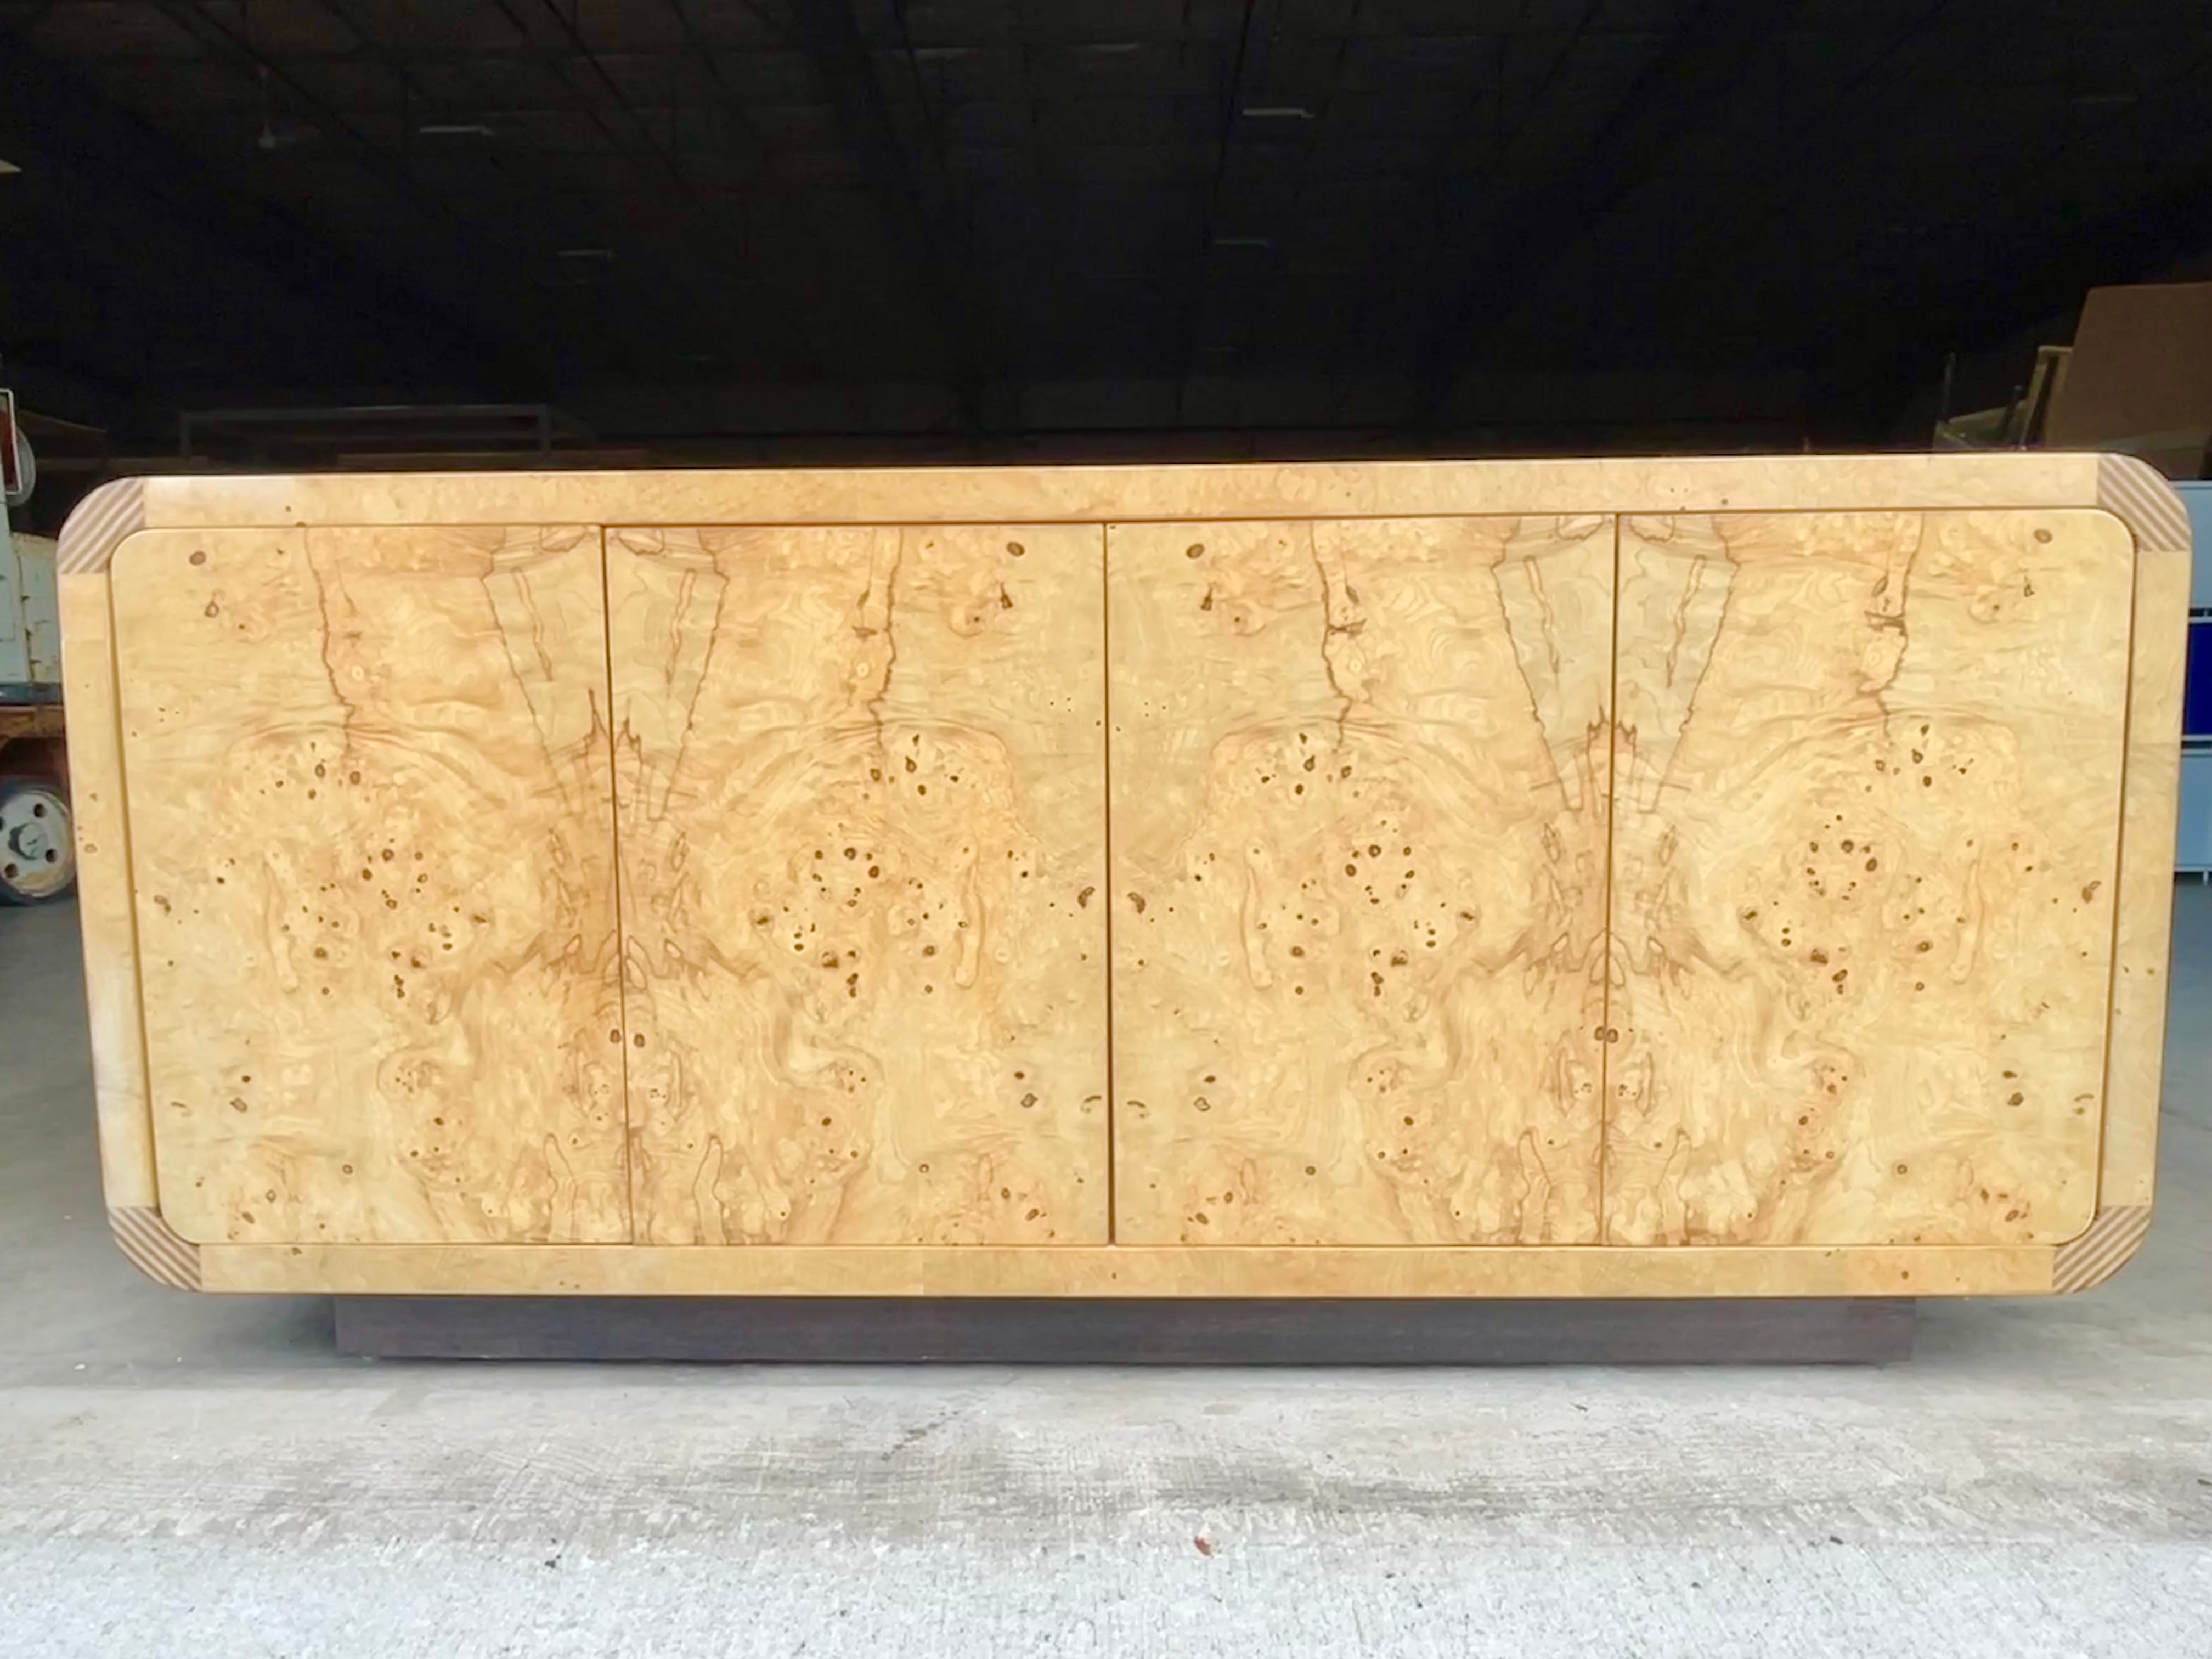 Henredon scene two credenza sideboard buffet cabinet in olive ash burl bookmatched veneer with zebra wood radiused corners and four flush doors with spring clip closures. Circa 1985.
Divided into two compartments each with a single drawer and shelf.